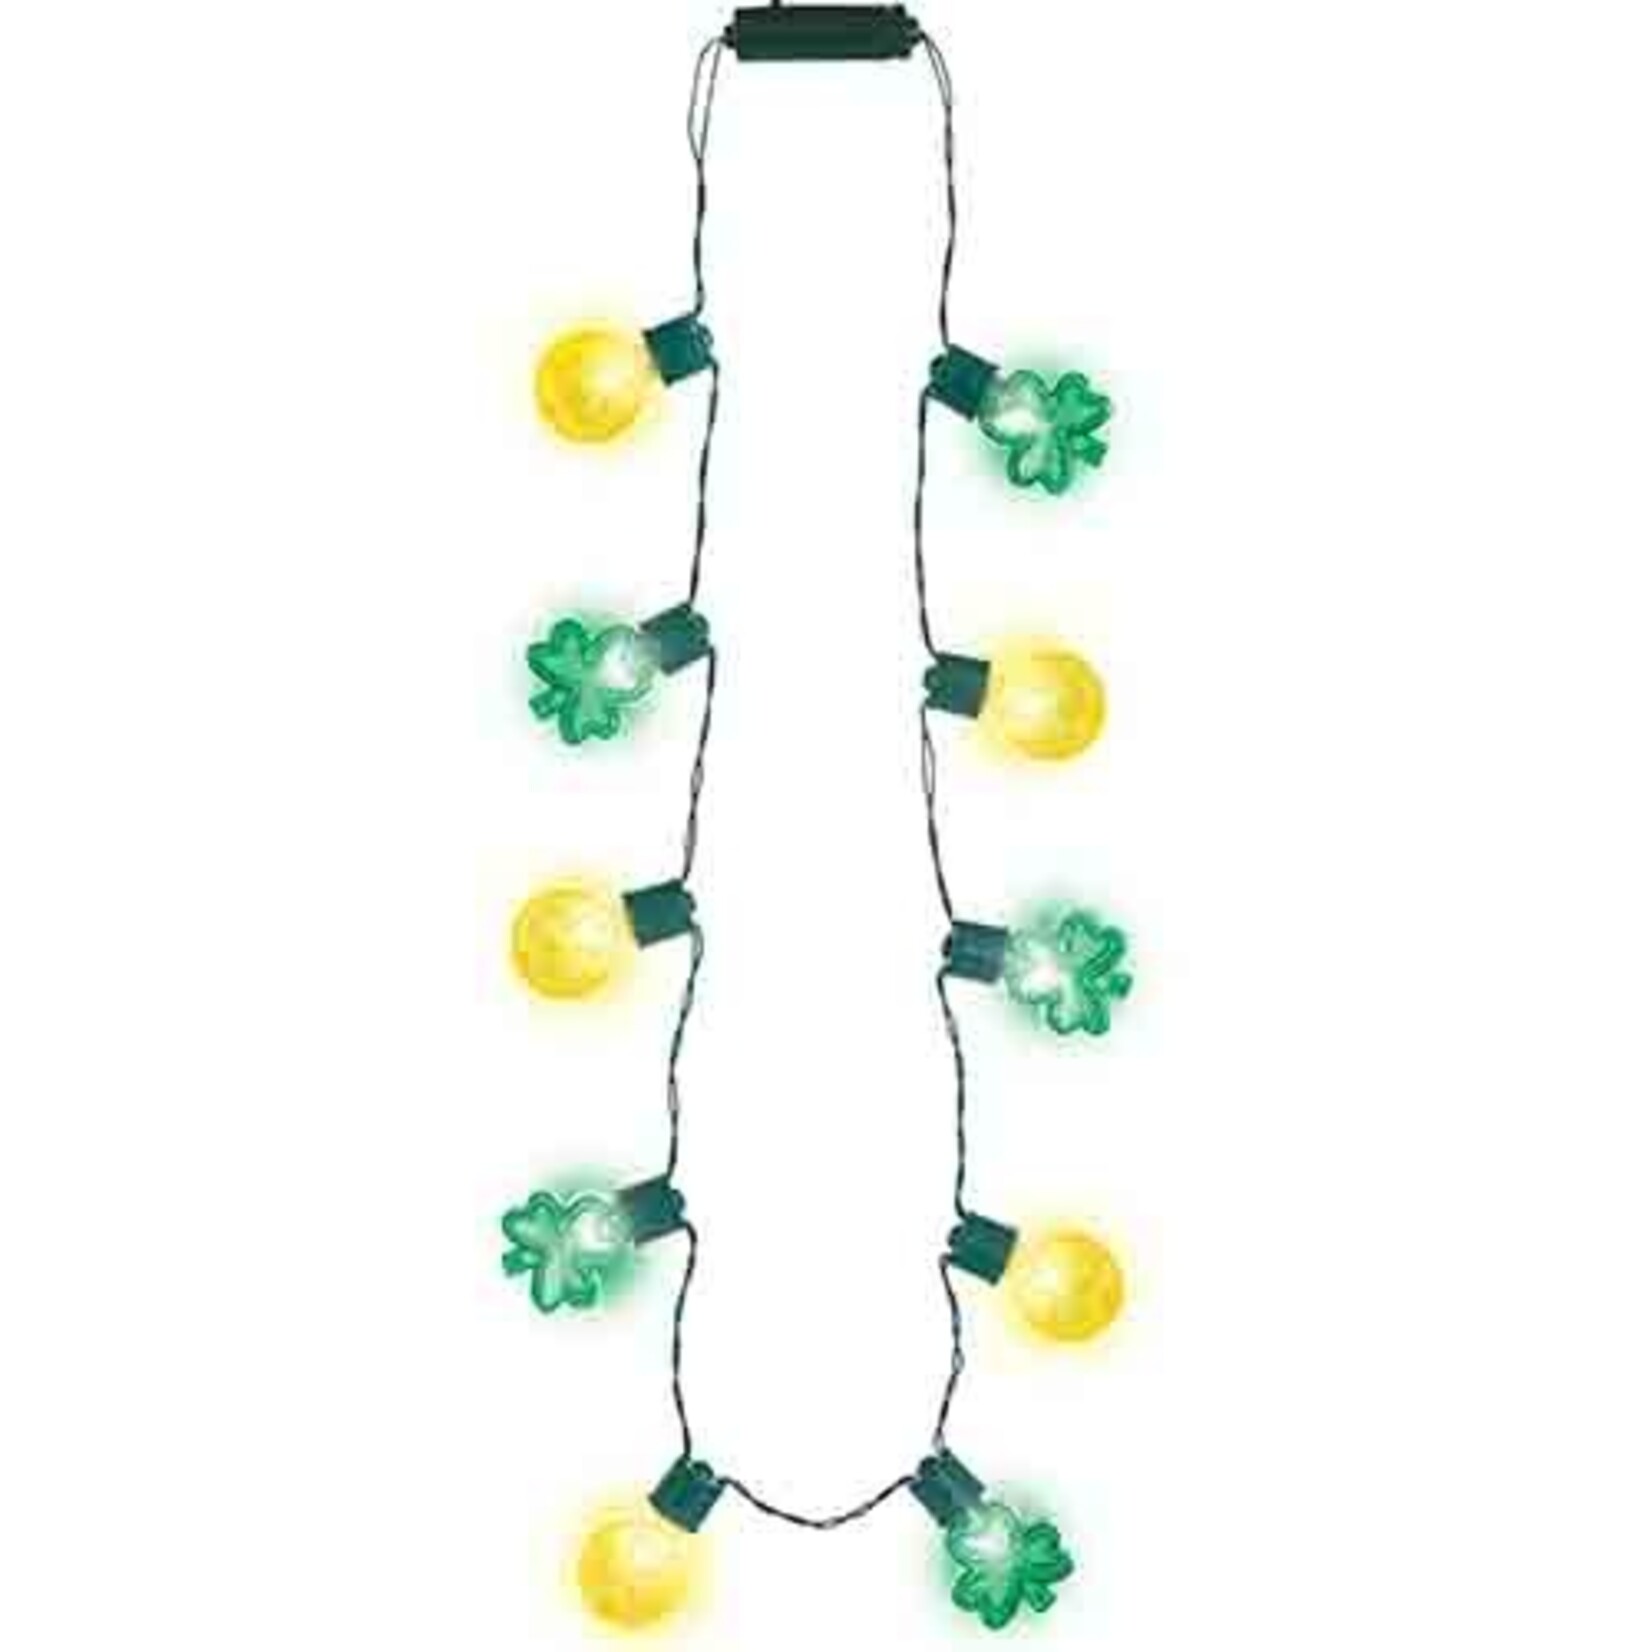 Amscan St. Patrick's Day Shamrock & Coin Light-Up Necklace - 1ct.